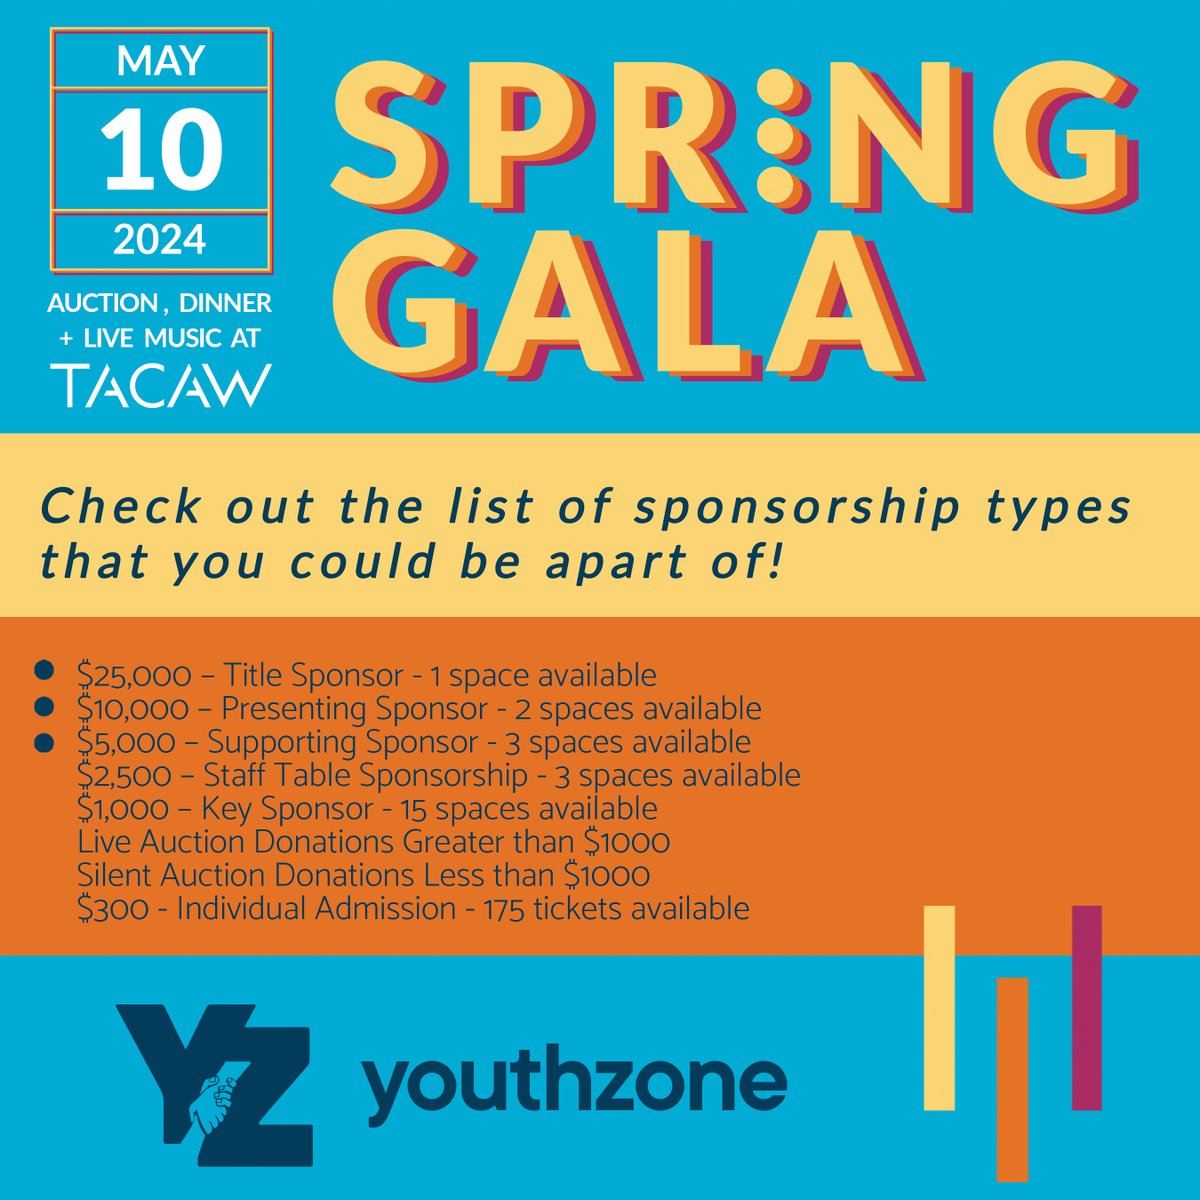 ✨Are you interested in #SupportingYouth and their families in your community? #Sponsoring our #SpringGala is the perfect way to become part of a heartfelt #coalition, dedicated to fostering a #PositiveFuture. 🧡
📱Visit our website to learn more: ecs.page.link/EJPLb